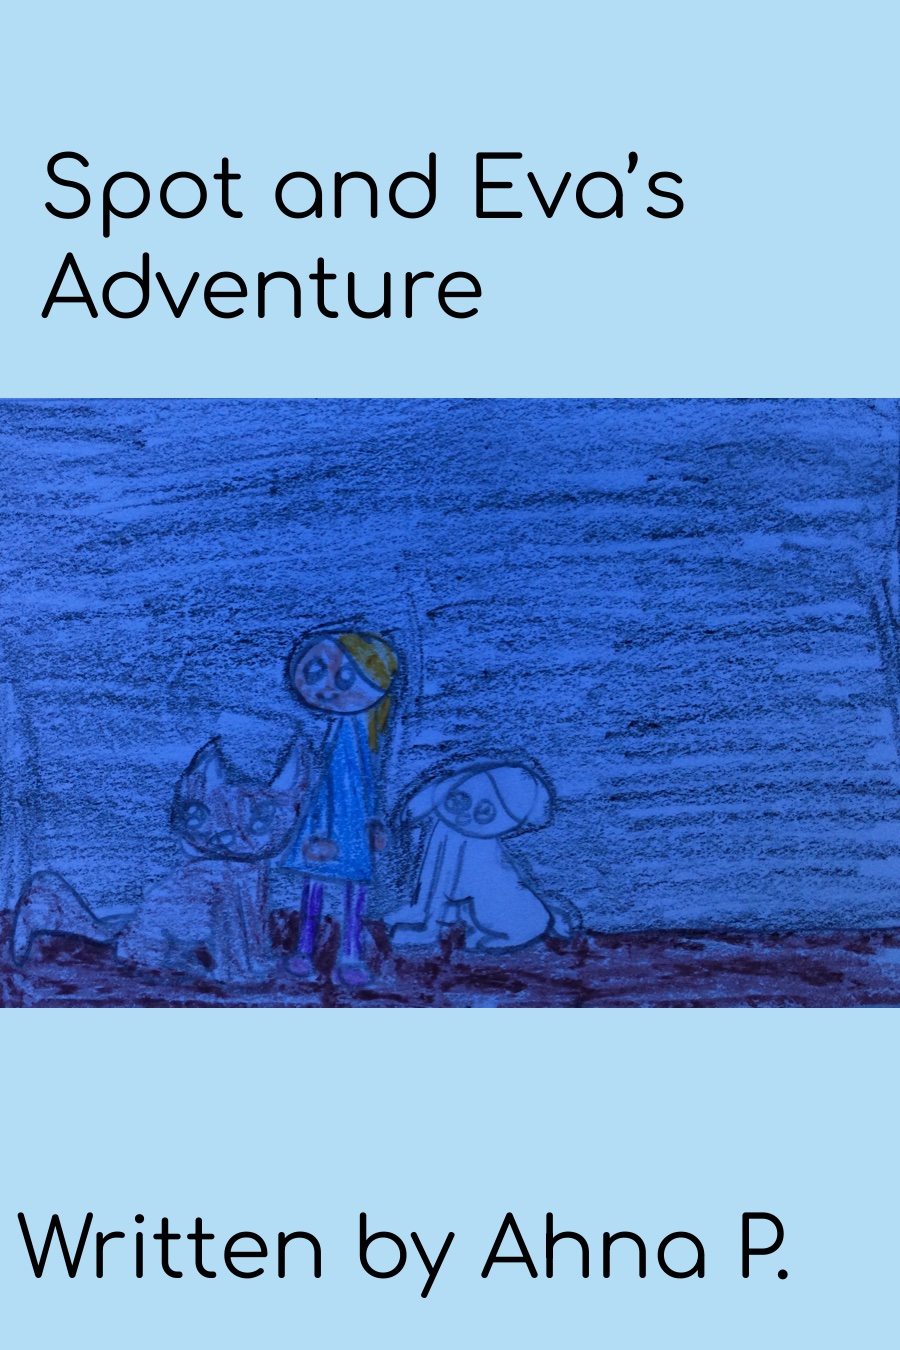 Spot and Evas Adventure by Ahna P